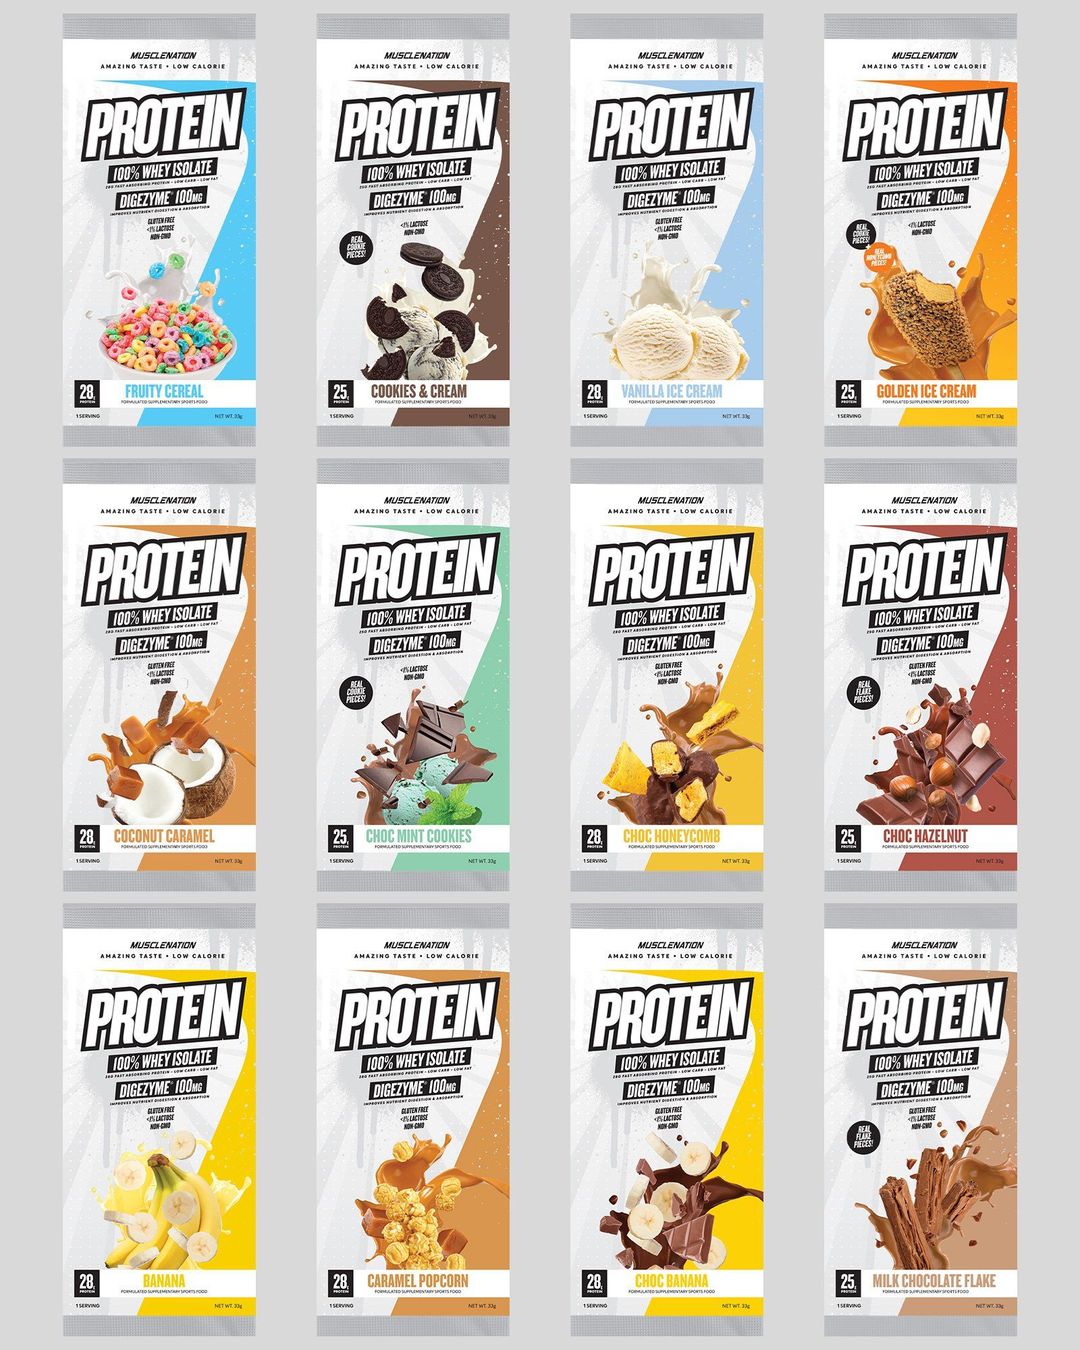 PROTEIN 100% WHEY ISOLATE SAMPLE PACK - 12 SACHETS